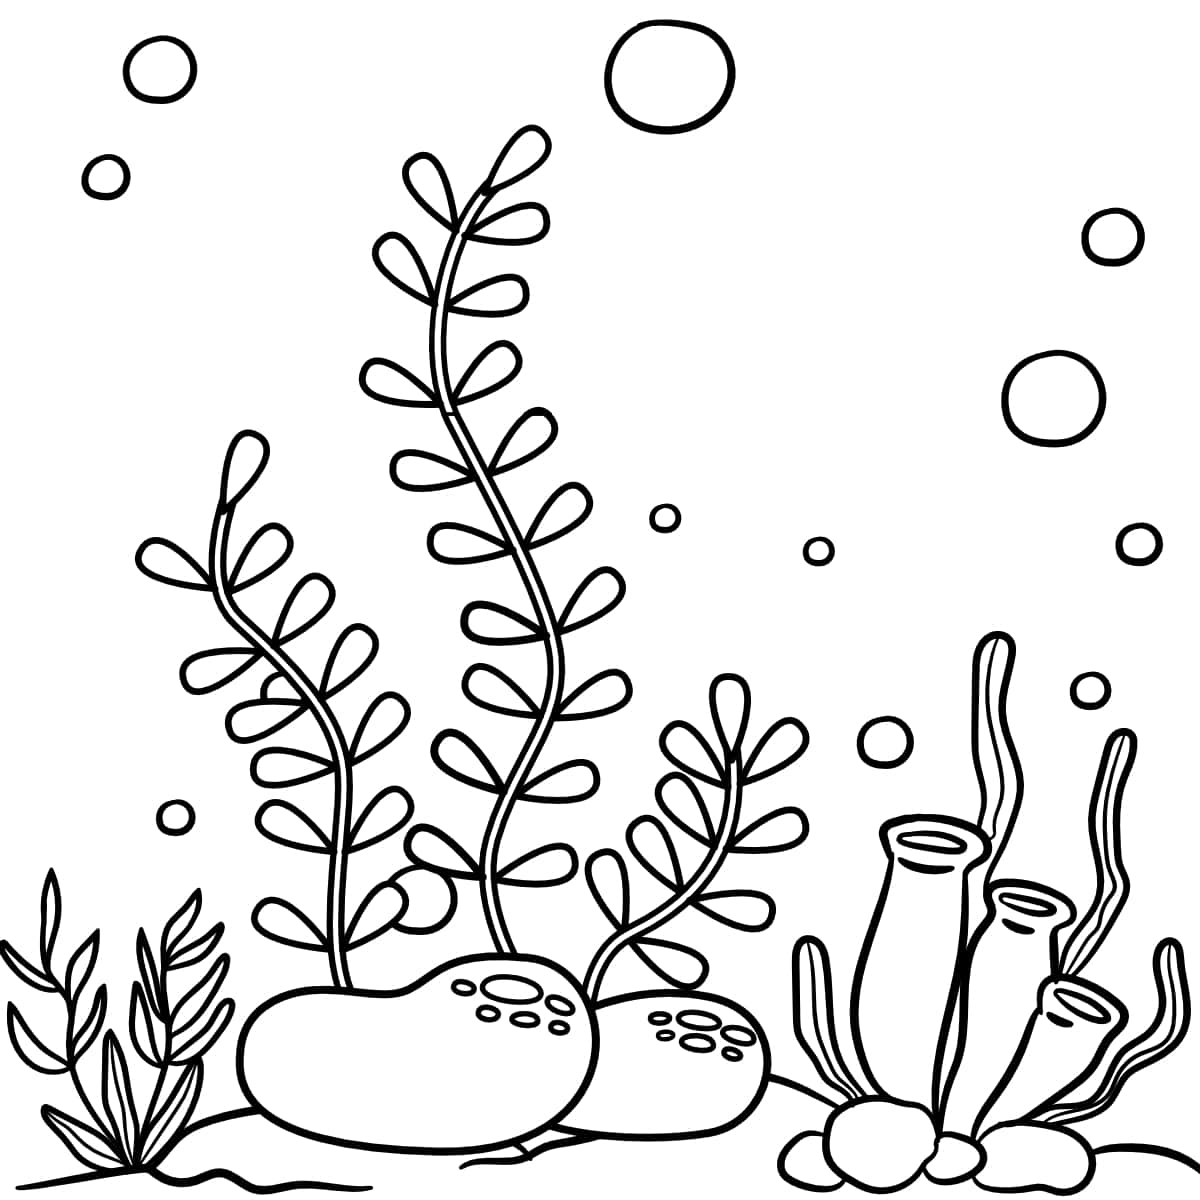 Coloring page of an underwater scene with algae and bubbles.